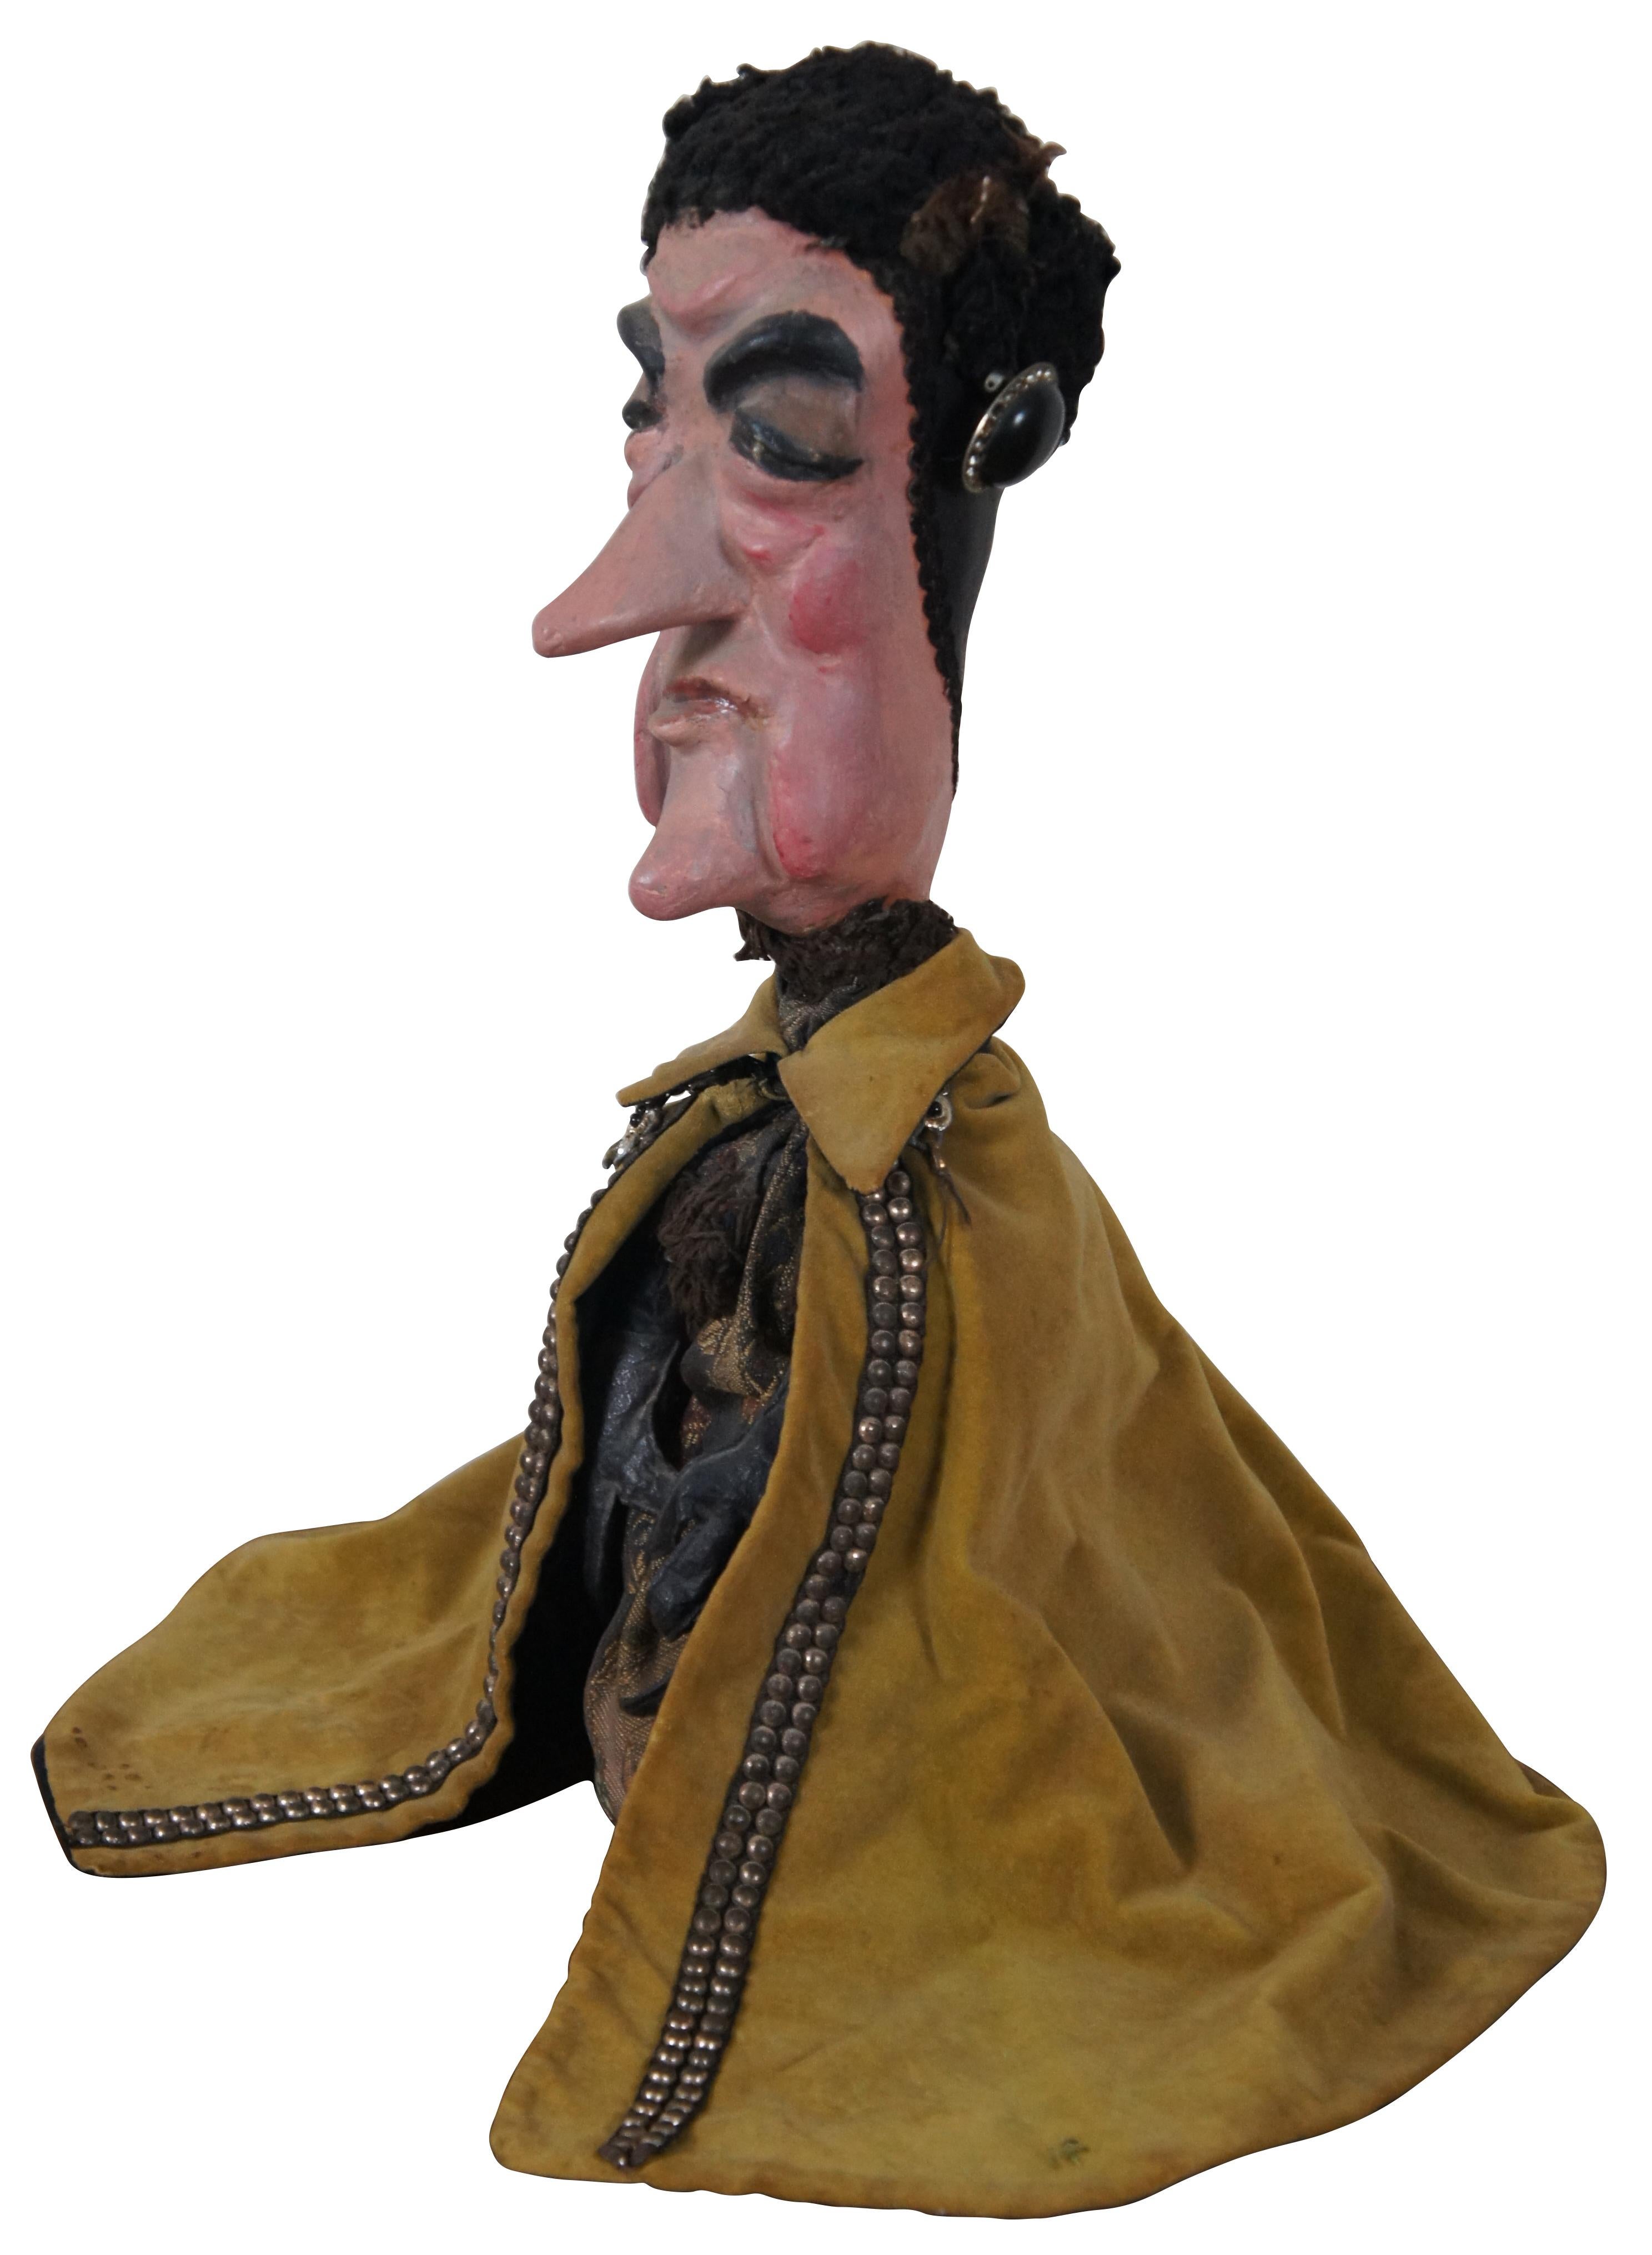 Antique hand made and painted paper mache hand puppet in the shape of a masculine human figure wearing a fur cap, brocade tunic, leather gloves and a mustard yellow velvet cape. Comes with a vintage distressed painted stand.